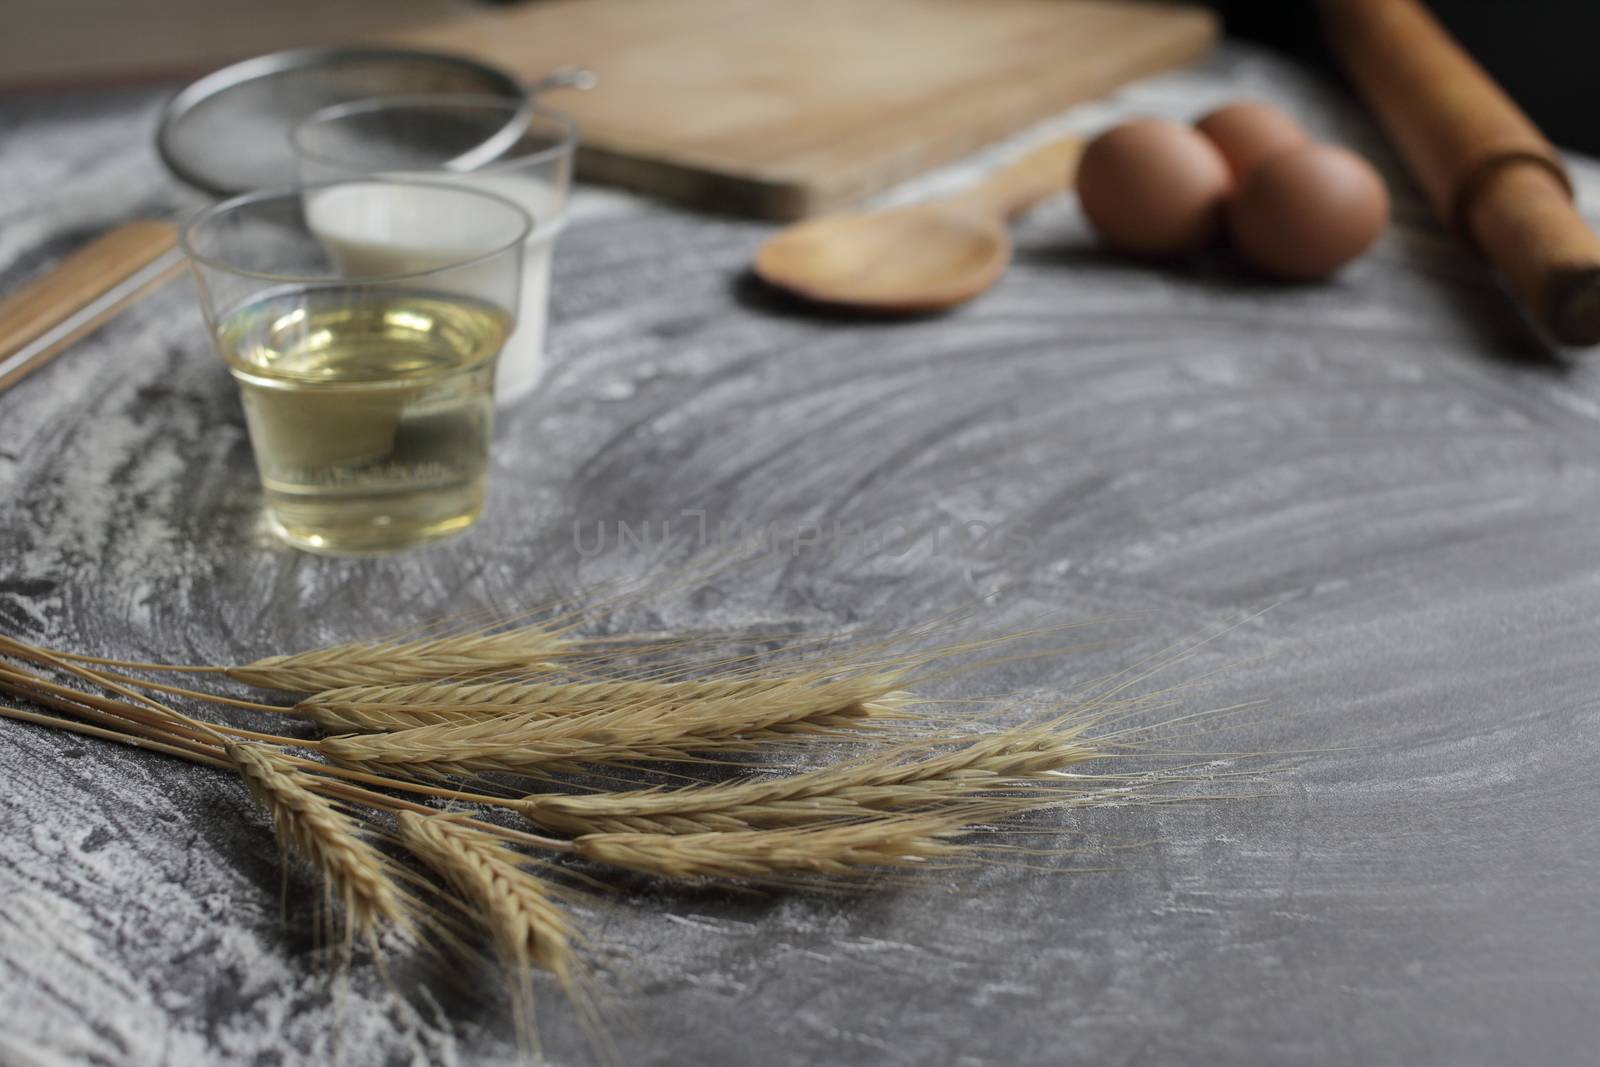 Chicken egg, flour, olive oil, milk, wheat ears, kitchen tool on gray table background. Products for baking bakery products. Cutting board, rolling pin, flour sieve, wooden spoon. For bread or cake